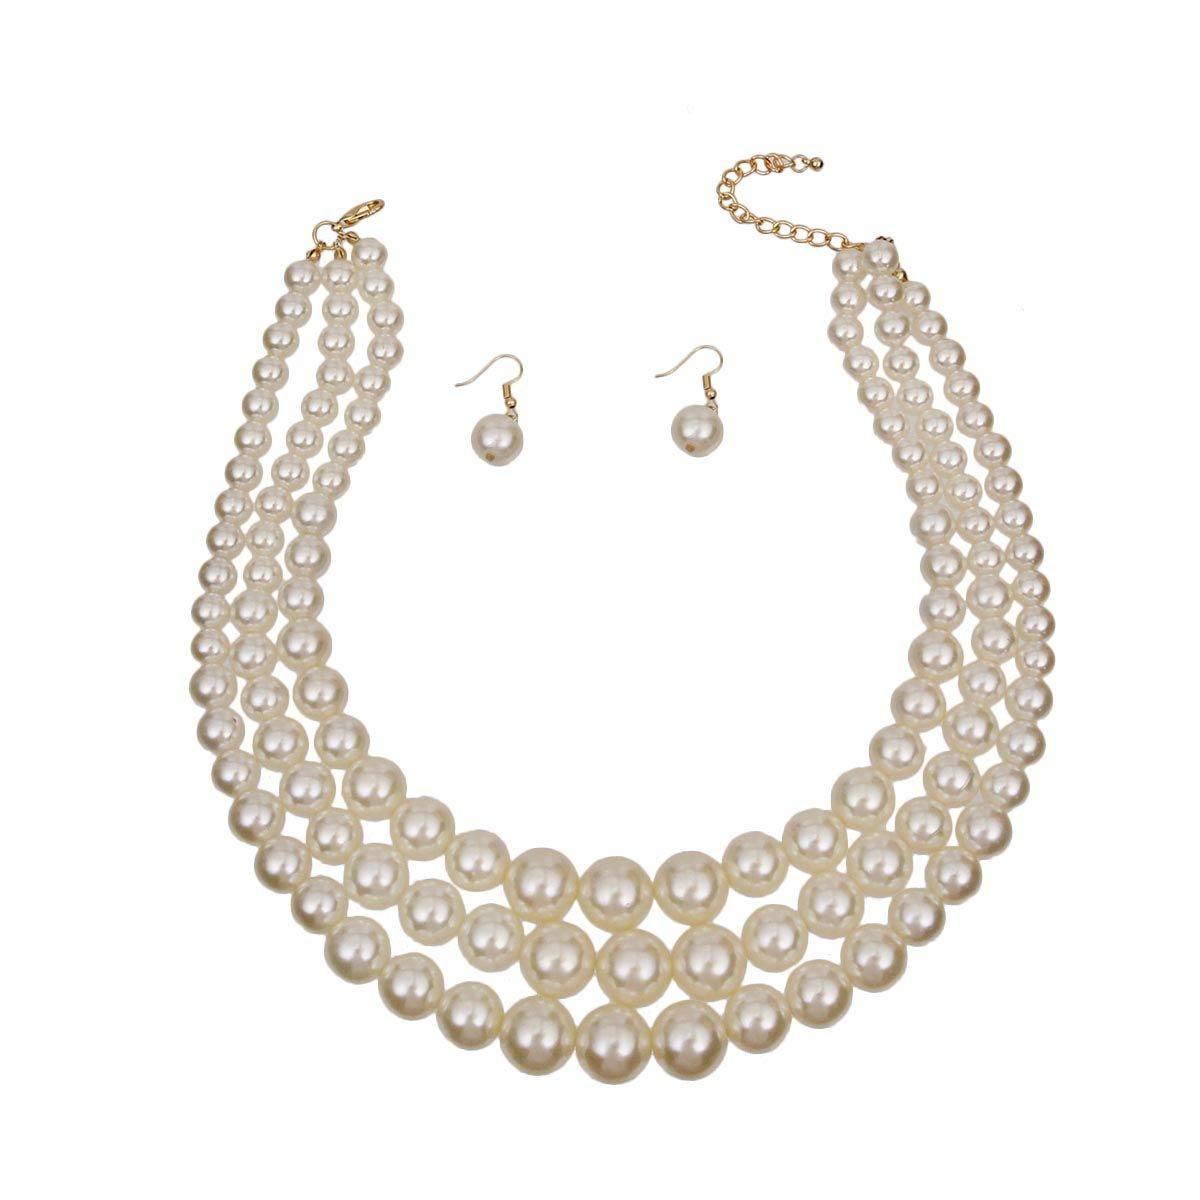 Classic Vintage-style 3-Strand Cream Pearl Necklace Set